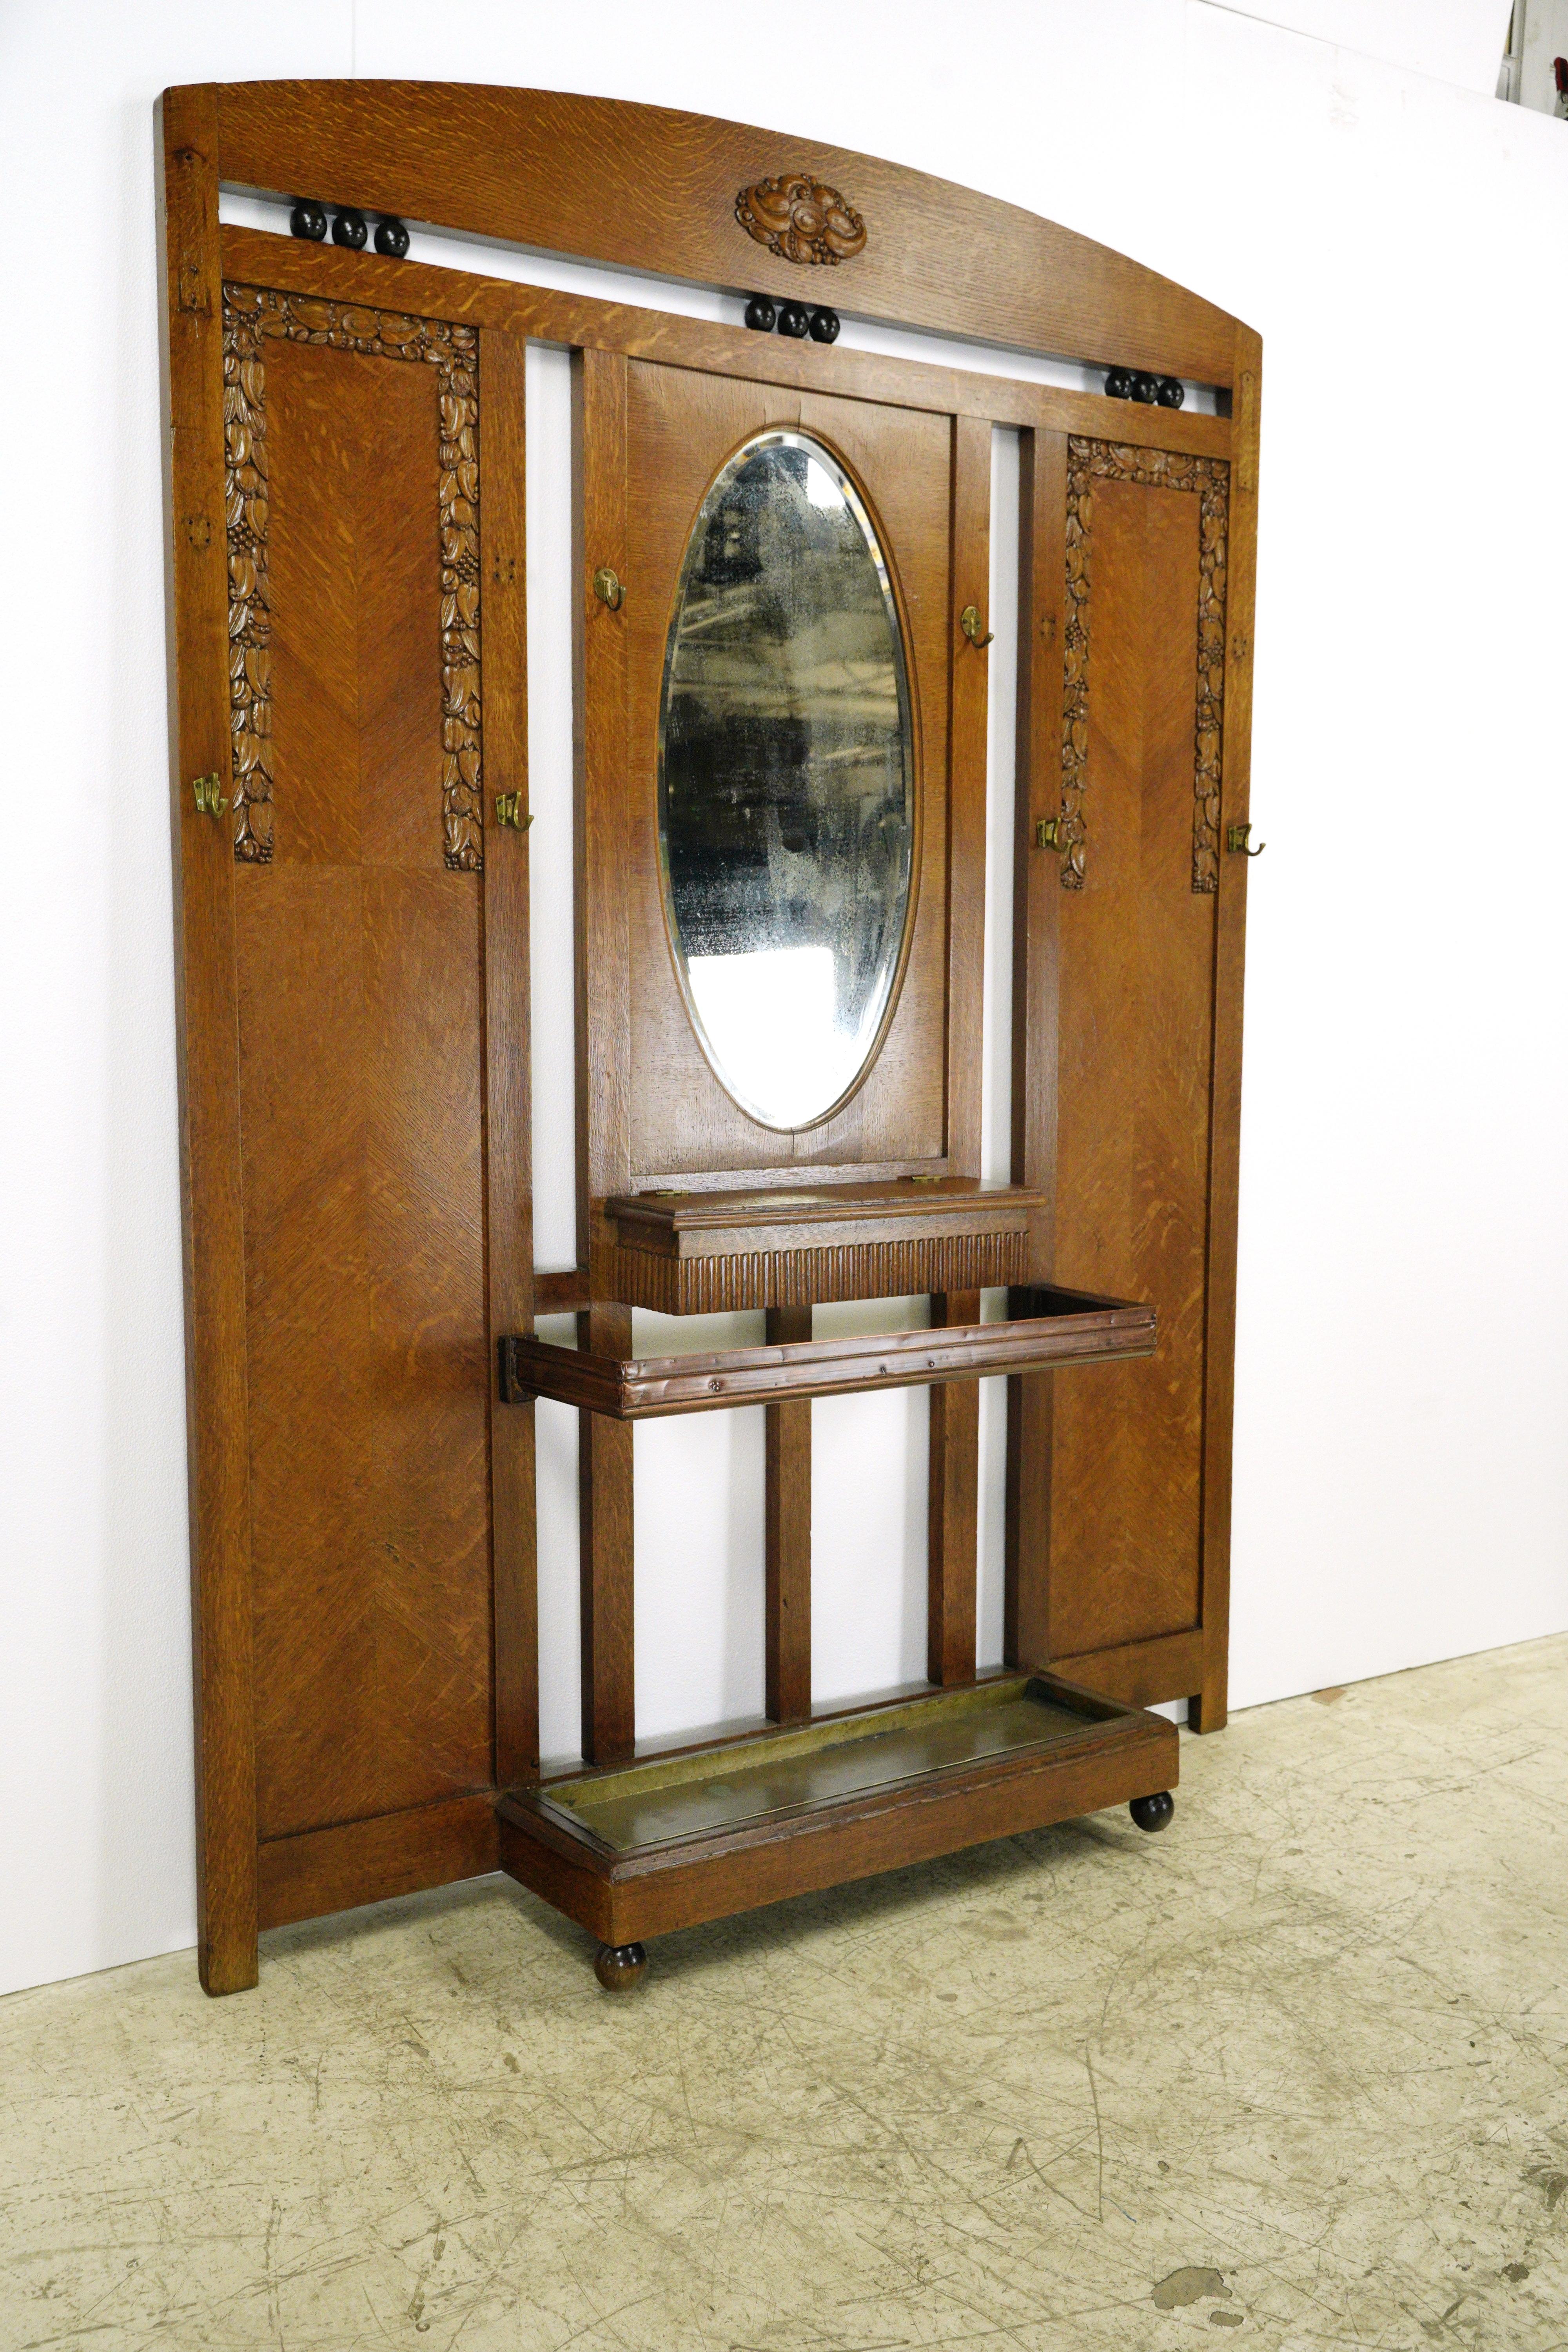 Art Deco style oak hall tree with an oval beveled mirror, carved decorative details and a bottom umbrella stand from the 1930s. Good condition with appropriate wear from age. Some minor wood cracking around mirror. One available.  Please note, this